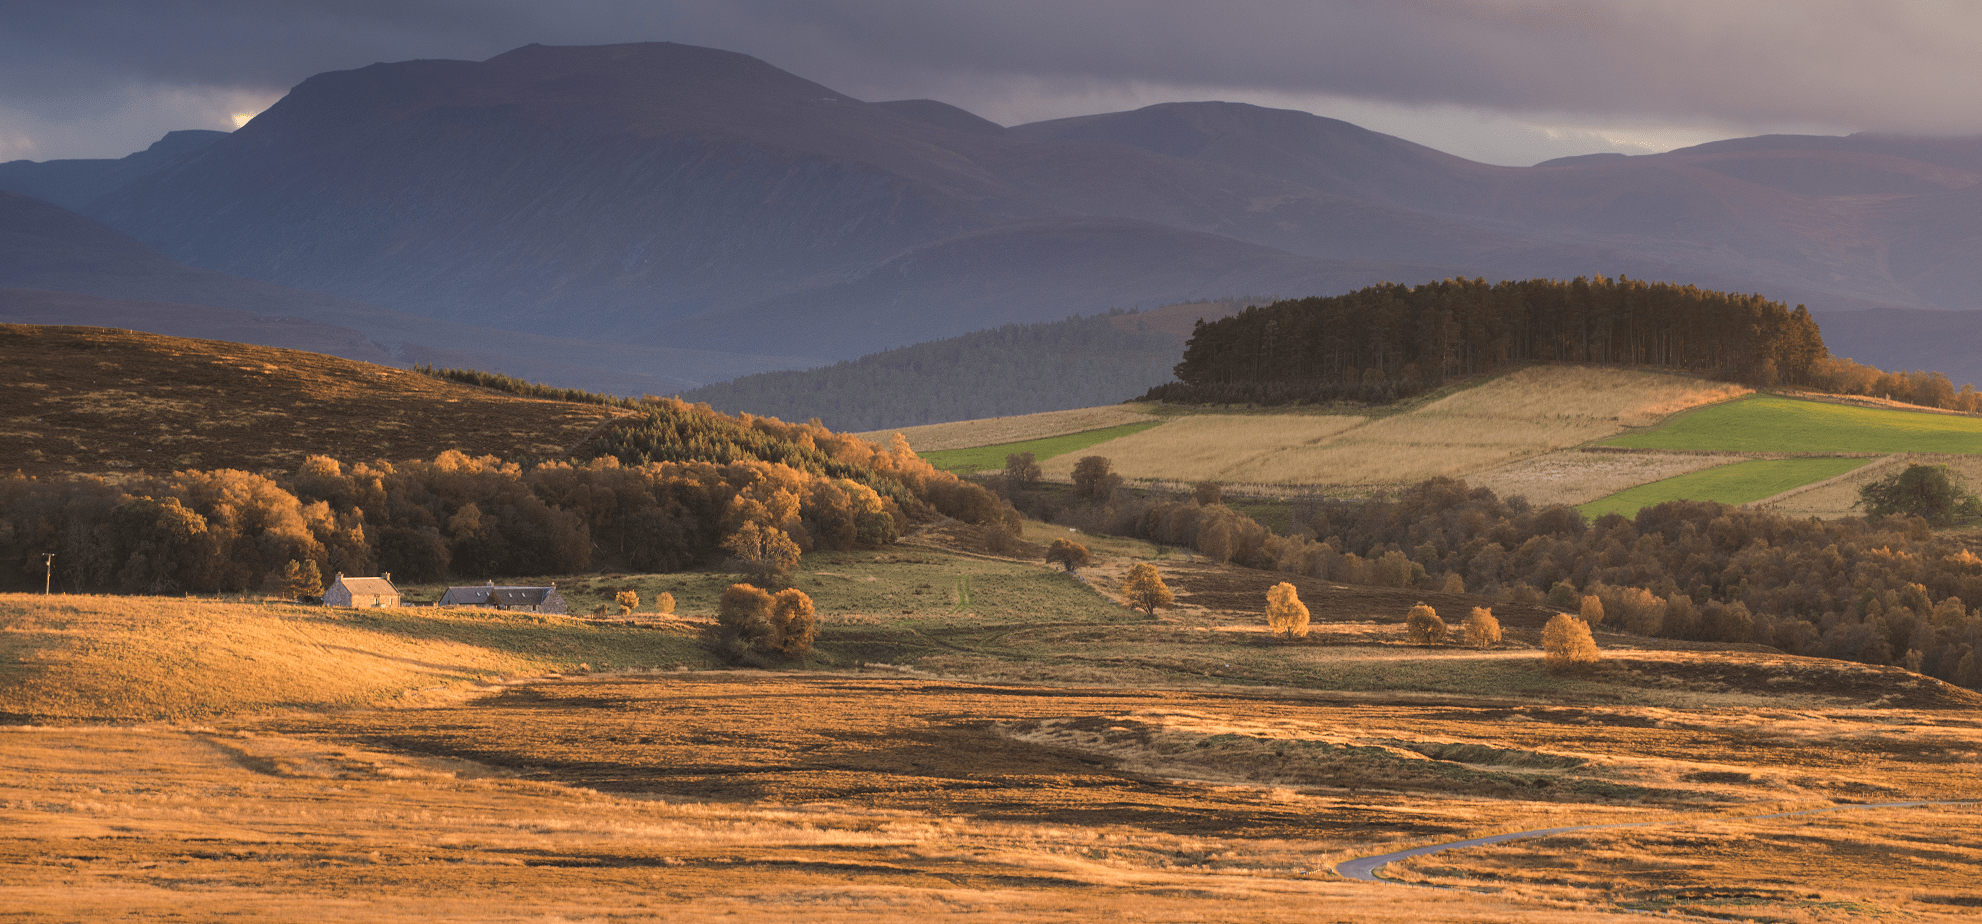 Corriechullie Farm and the Cairngorm Mountains, Grantown-on-Spey